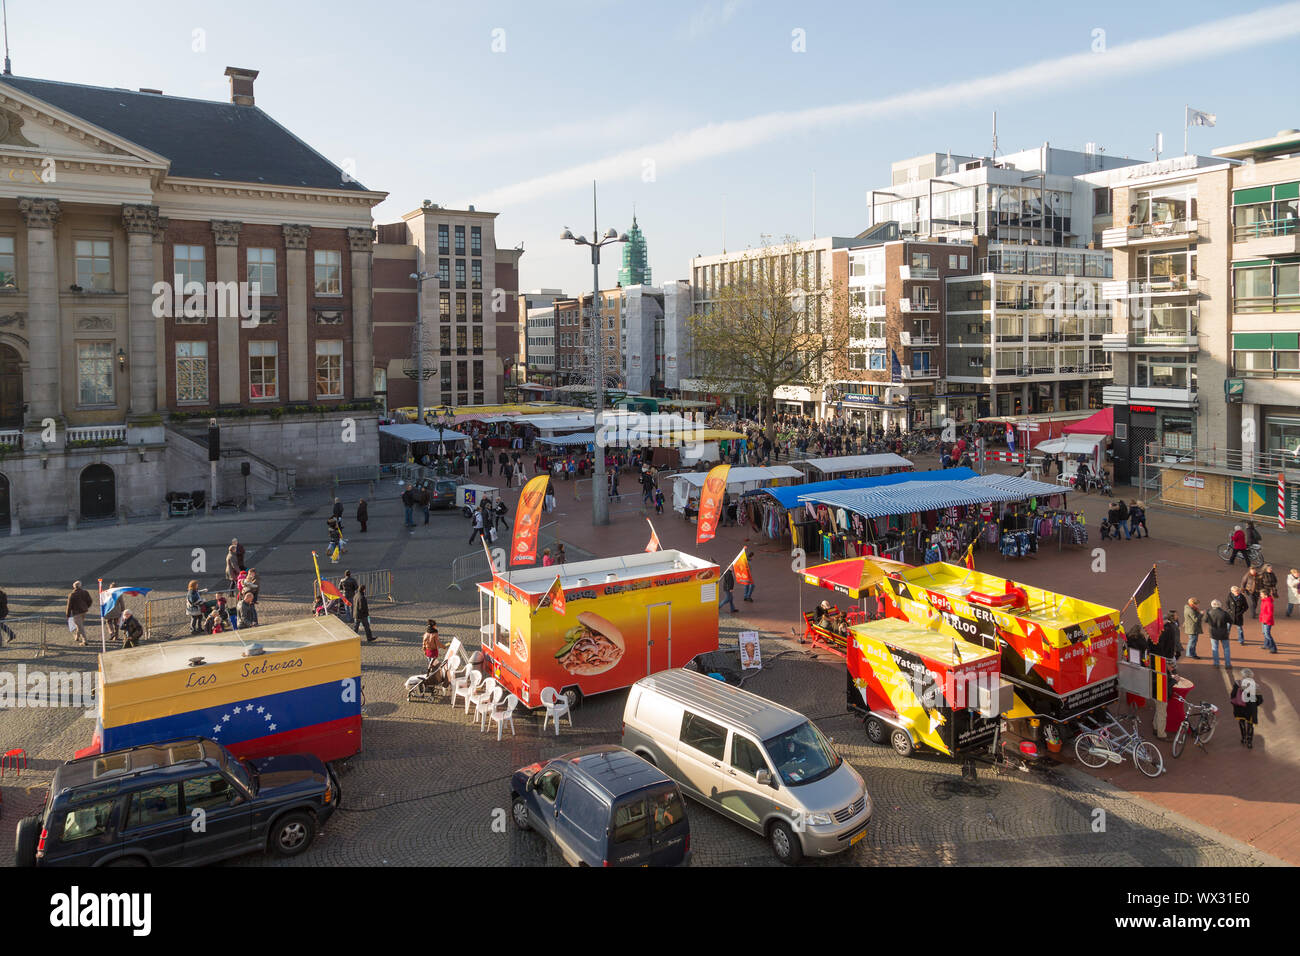 Central plaza 'Grote Markt' with market Groningen, The Netherlands Stock Photo